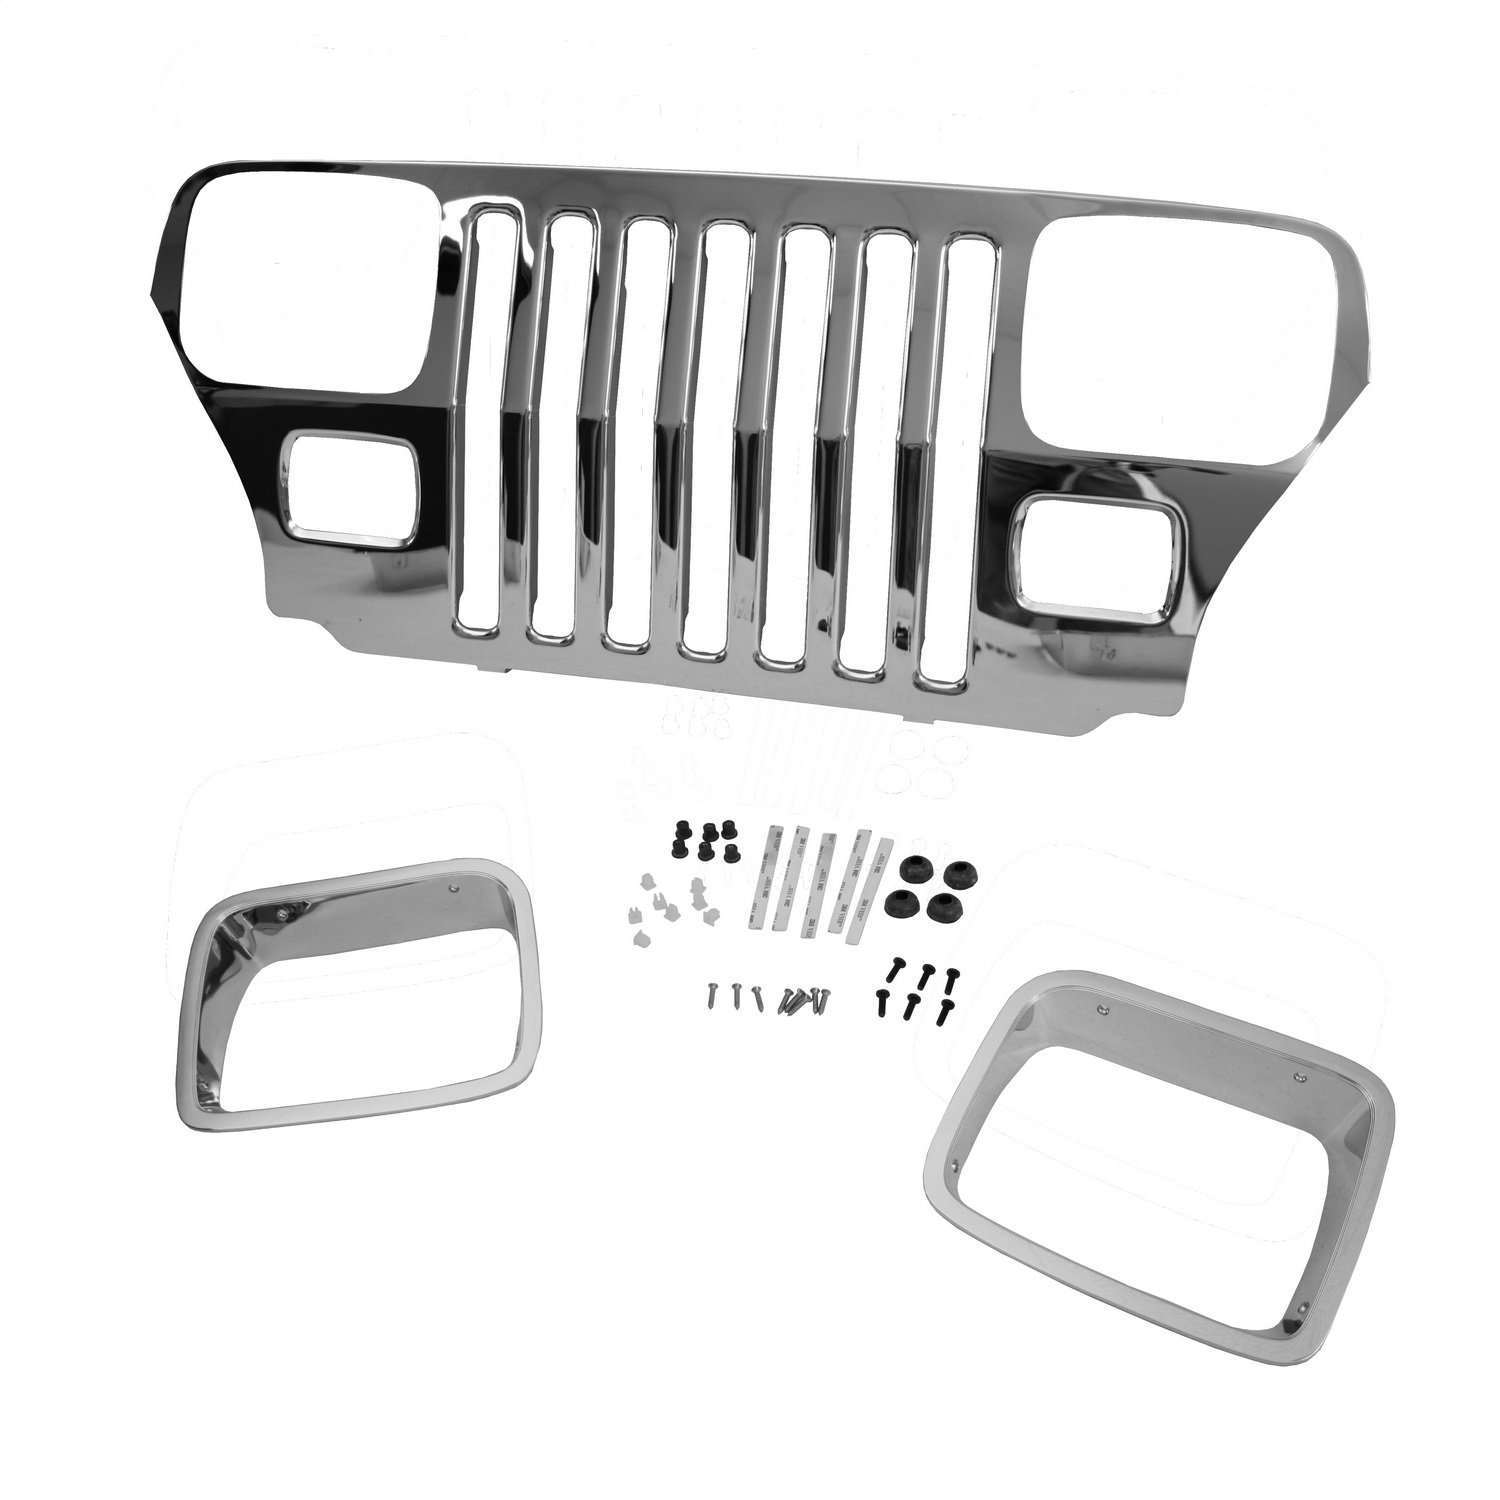 Omix This Chrome Grille Overlay From Mopar Fits 87-95 Jeep Wrangler Yj., BKGF-12033.06